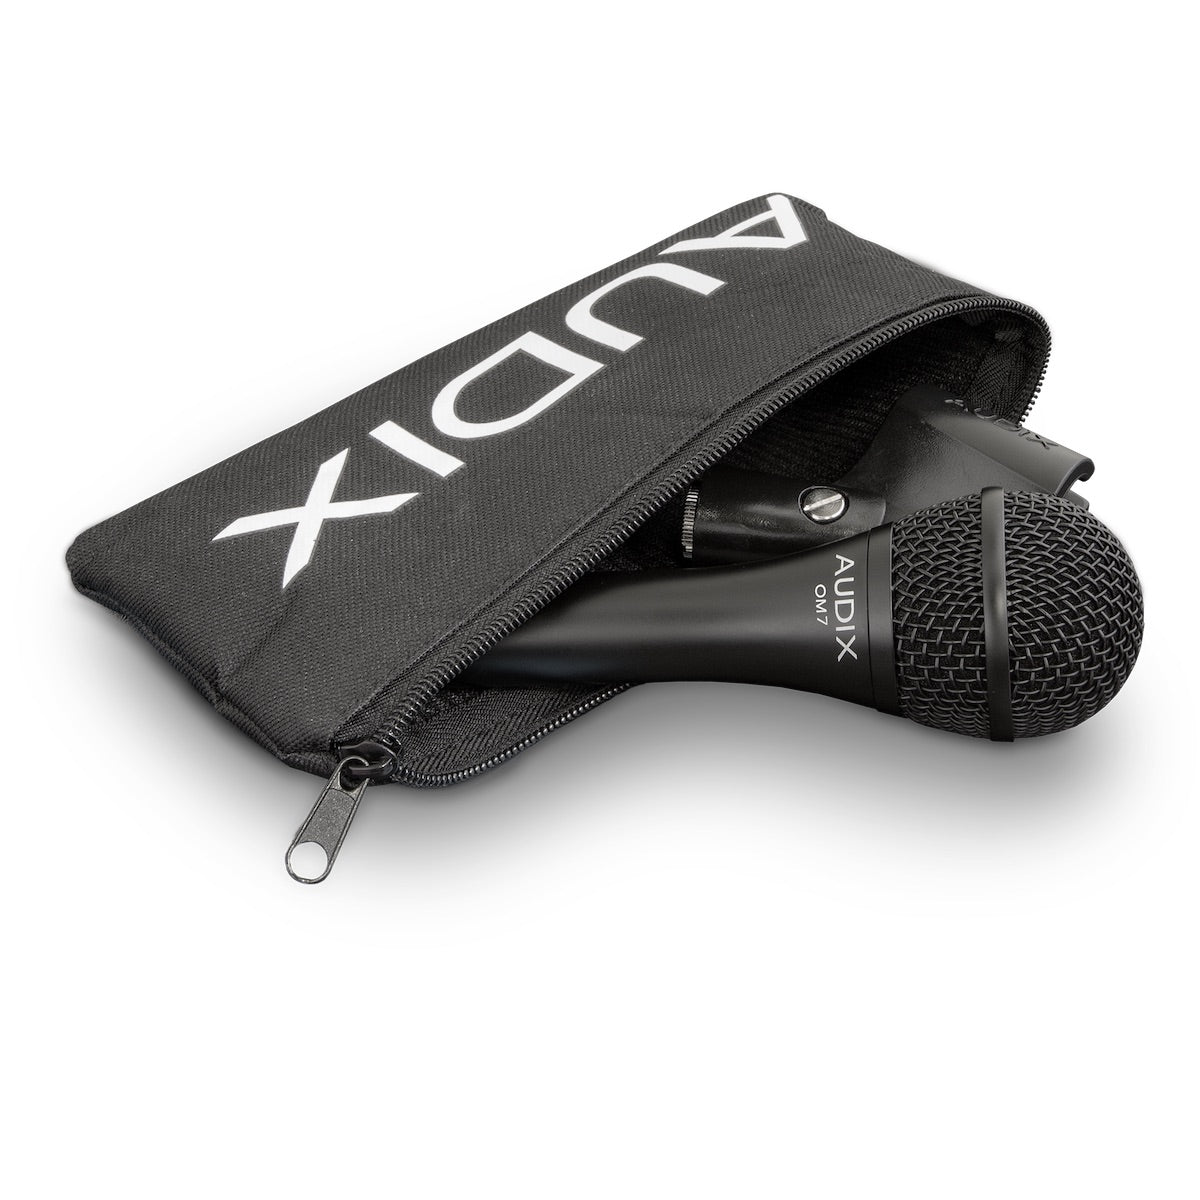 Audix OM7 Professional Dynamic Vocal Microphone with case